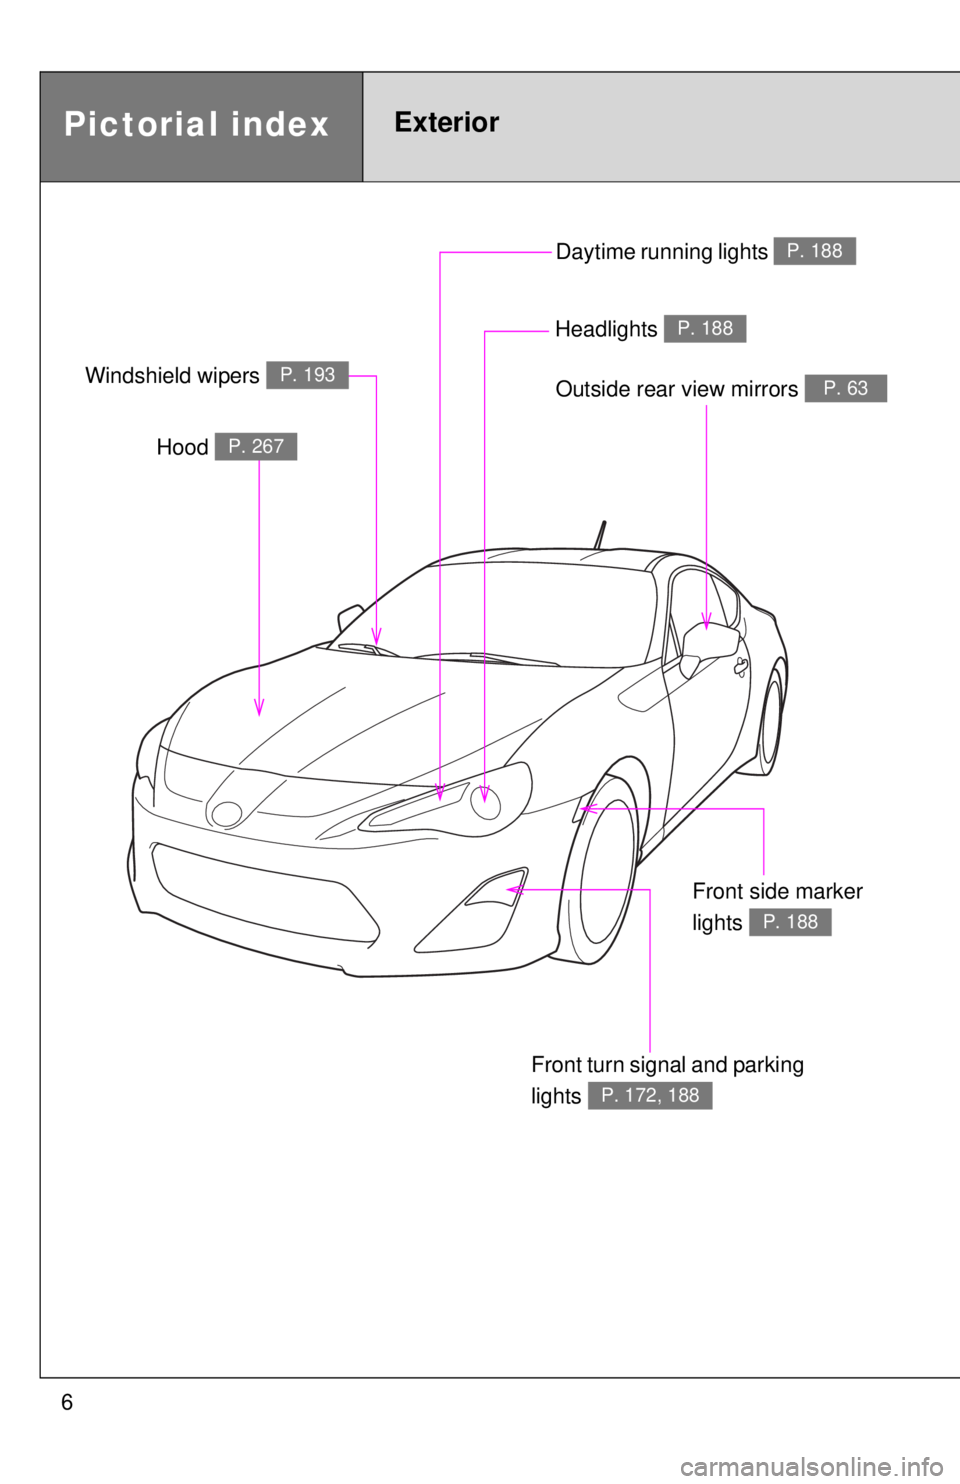 TOYOTA FR-S 2014  Owners Manual (in English) 6Daytime running lights 
P. 188
Pictorial indexExterior
Outside rear view mirrors P. 63
Front turn signal and parking 
lights 
P. 172, 188
Hood P. 267
Windshield wipers P. 193
Headlights P. 188
Front 